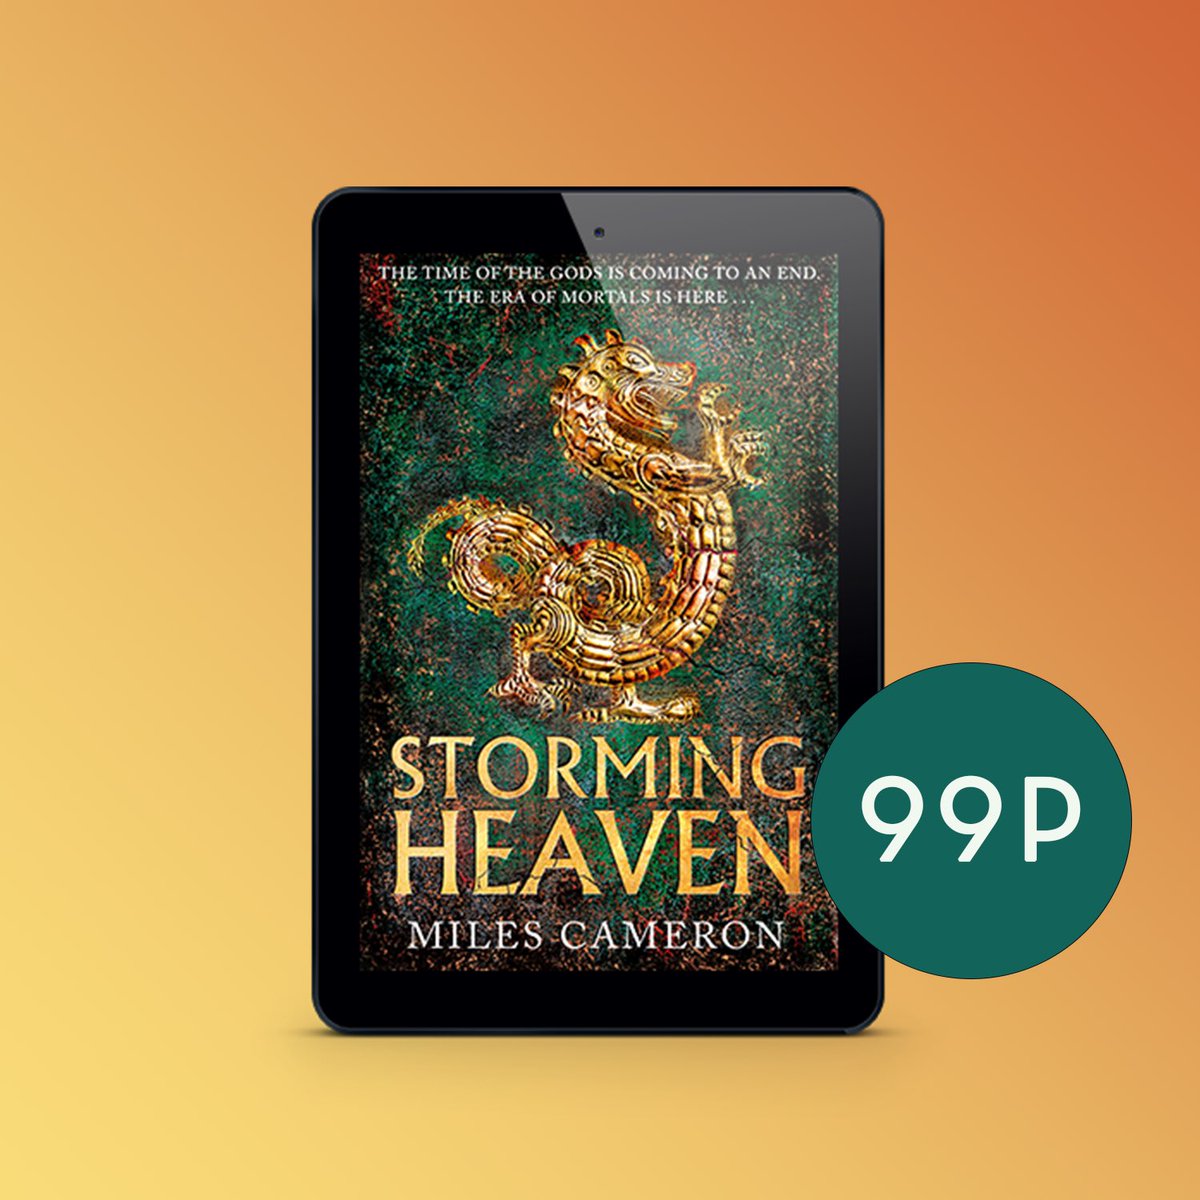 Just in case you don’t already have a copy, Storming Heaven is 99p all month!